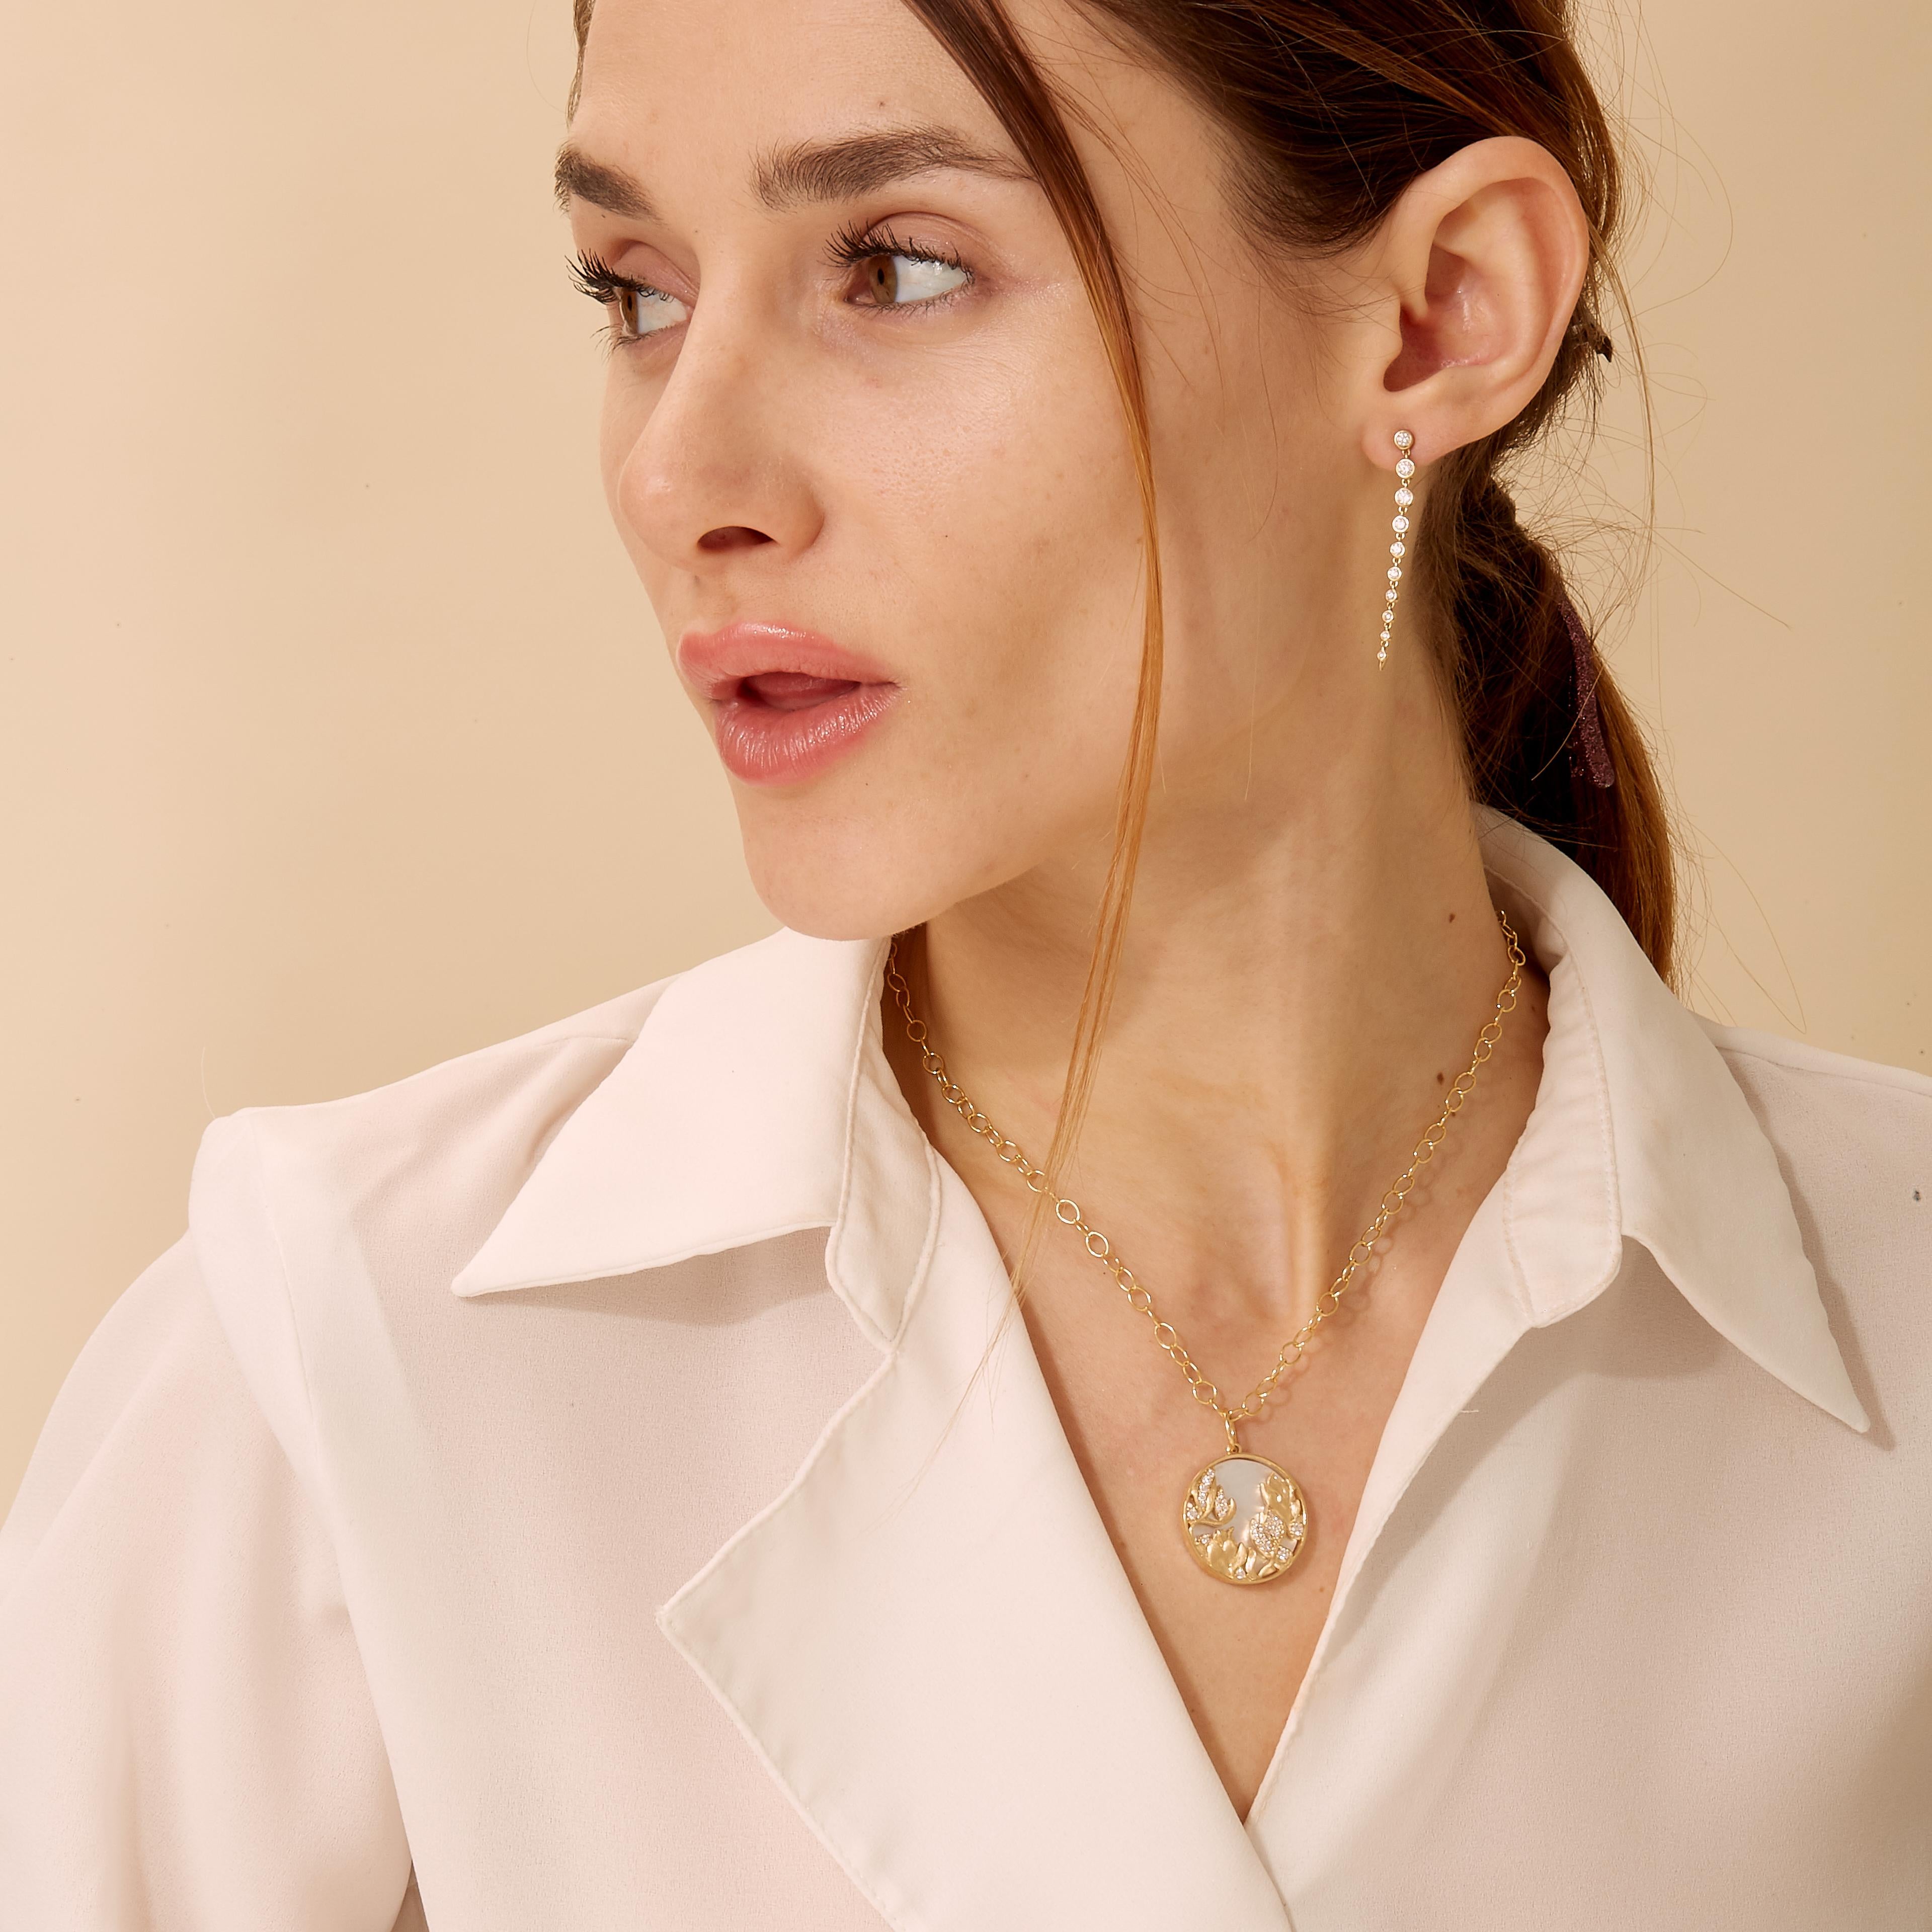 Created in 18 karat yellow gold
Mother of pearl 7.50 carats approx.
Diamonds 0.30 carat approx.
Limited edition
Chain sold separately

Meticulously crafted in 18 karat yellow gold, this limited edition pendant features a mesmerizing Mother of Pearl